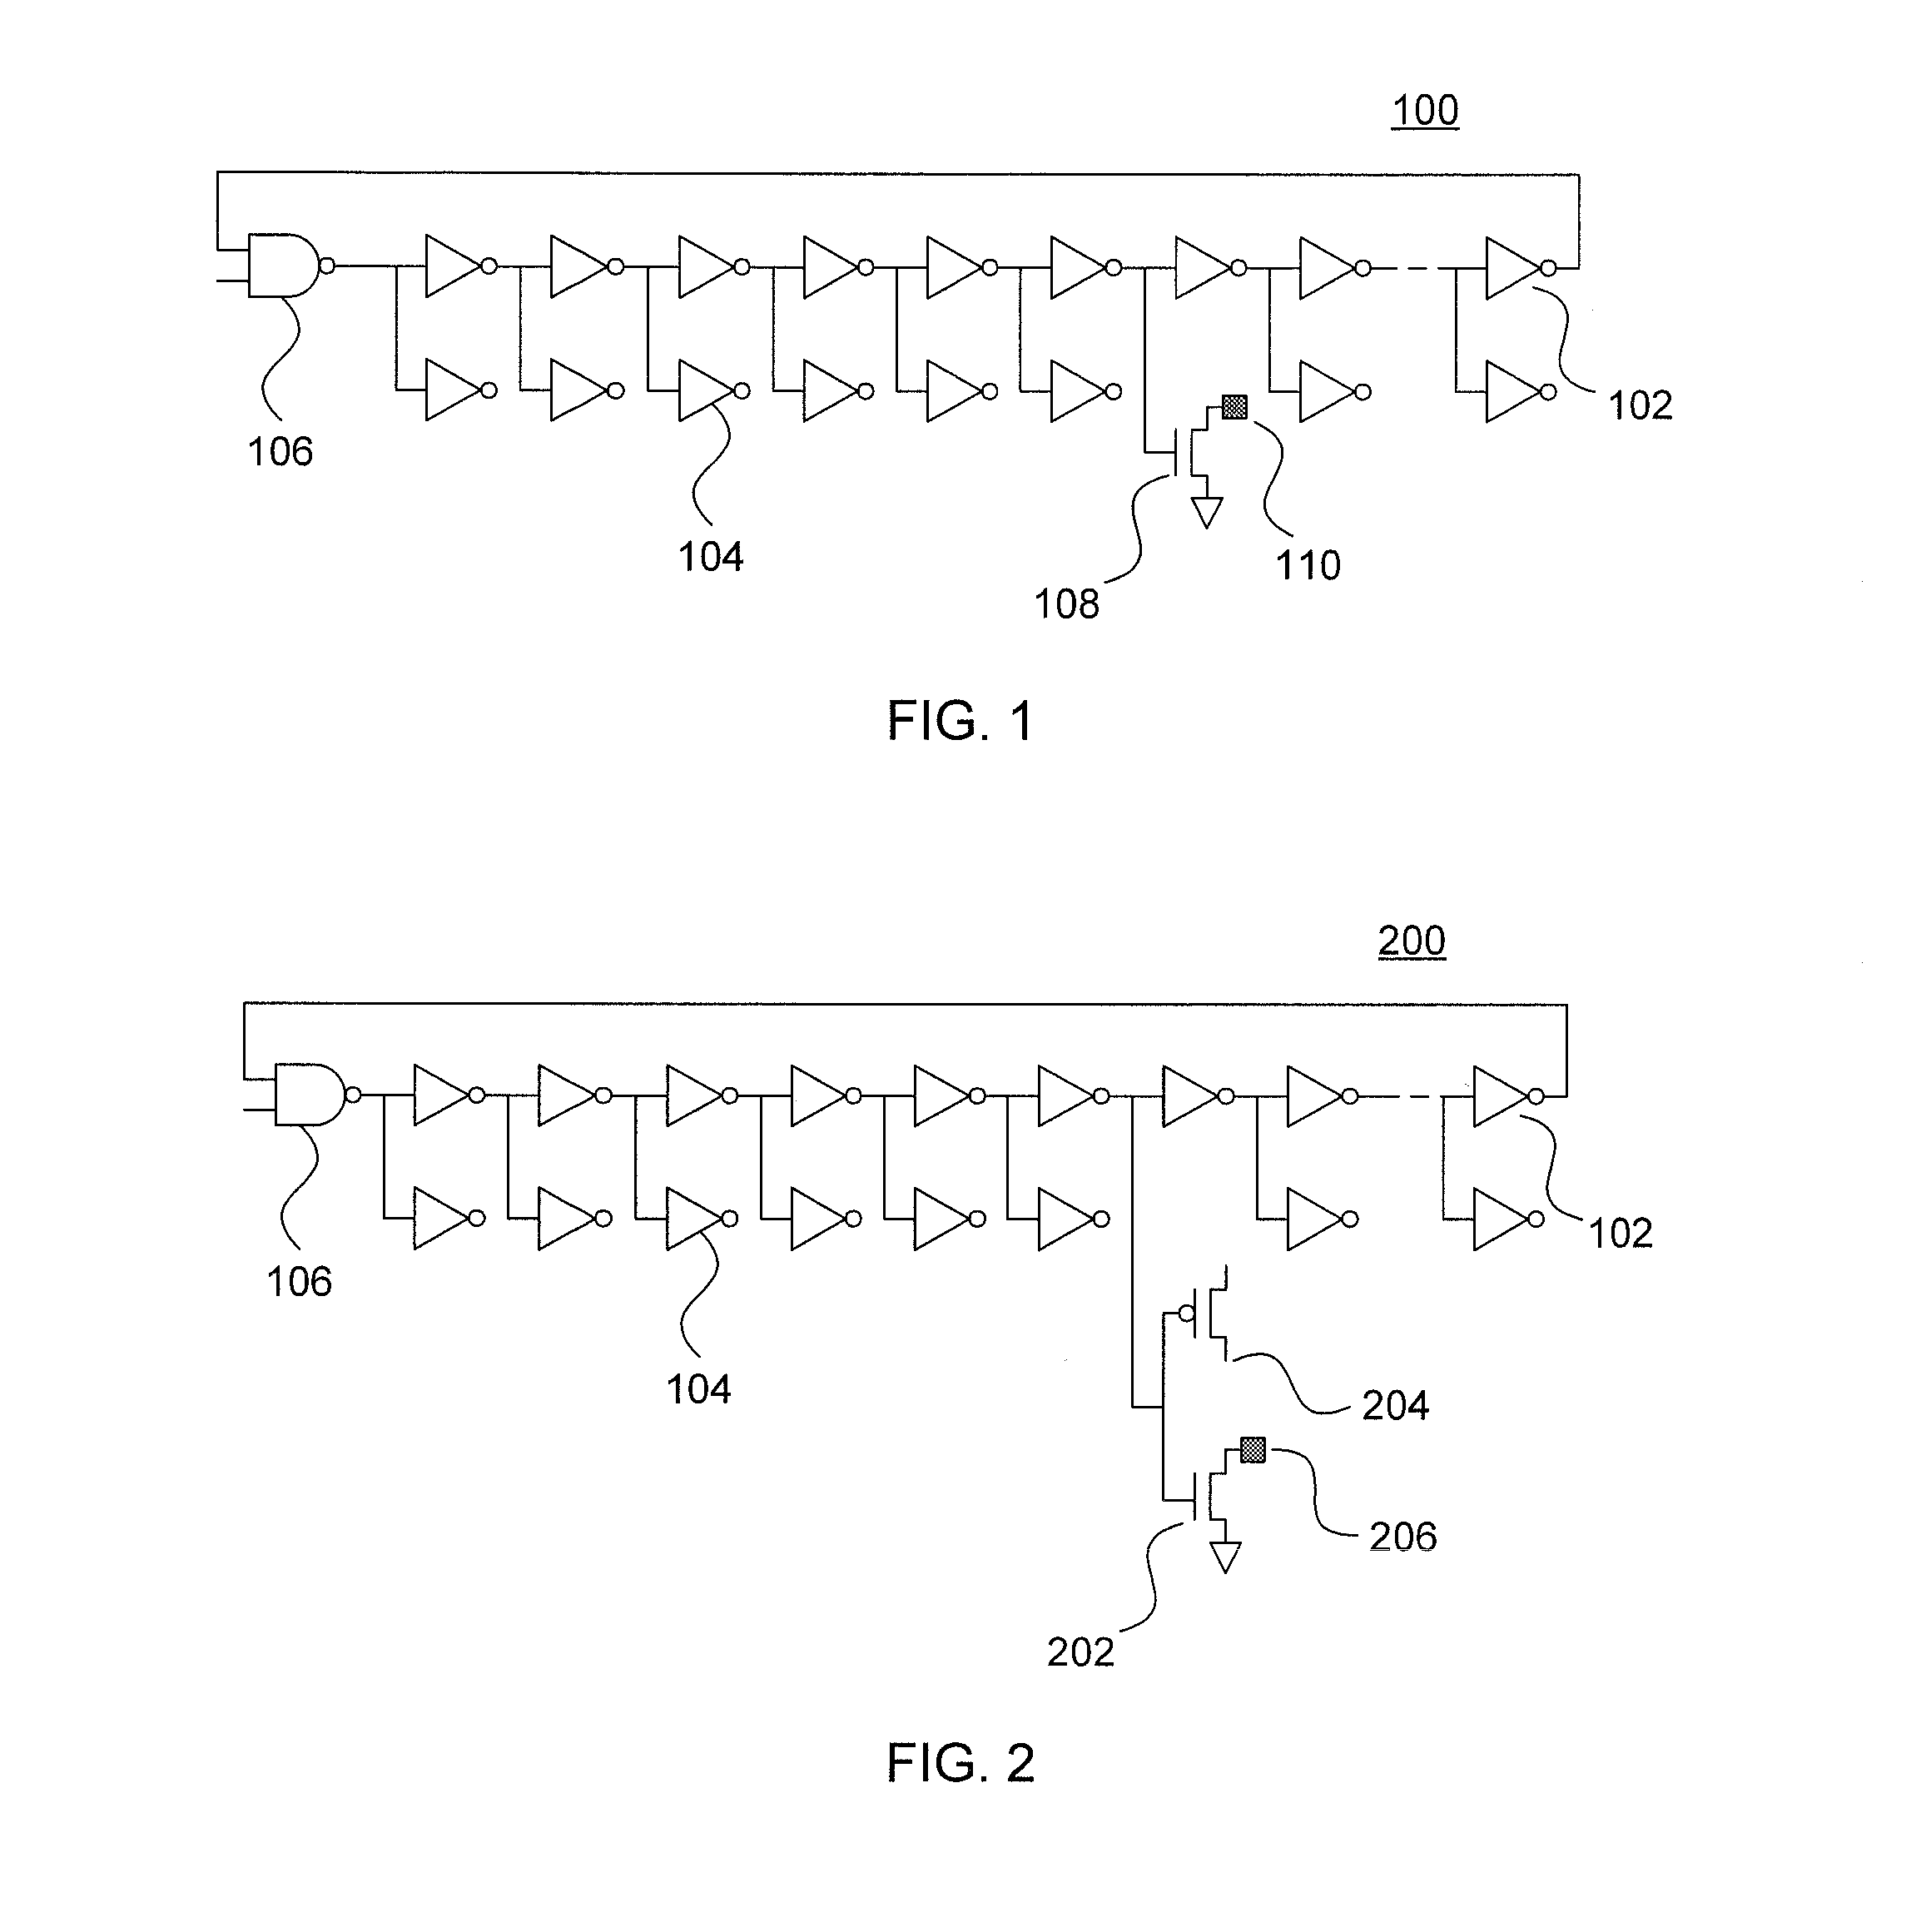 Measuring individual device degradation in CMOS circuits